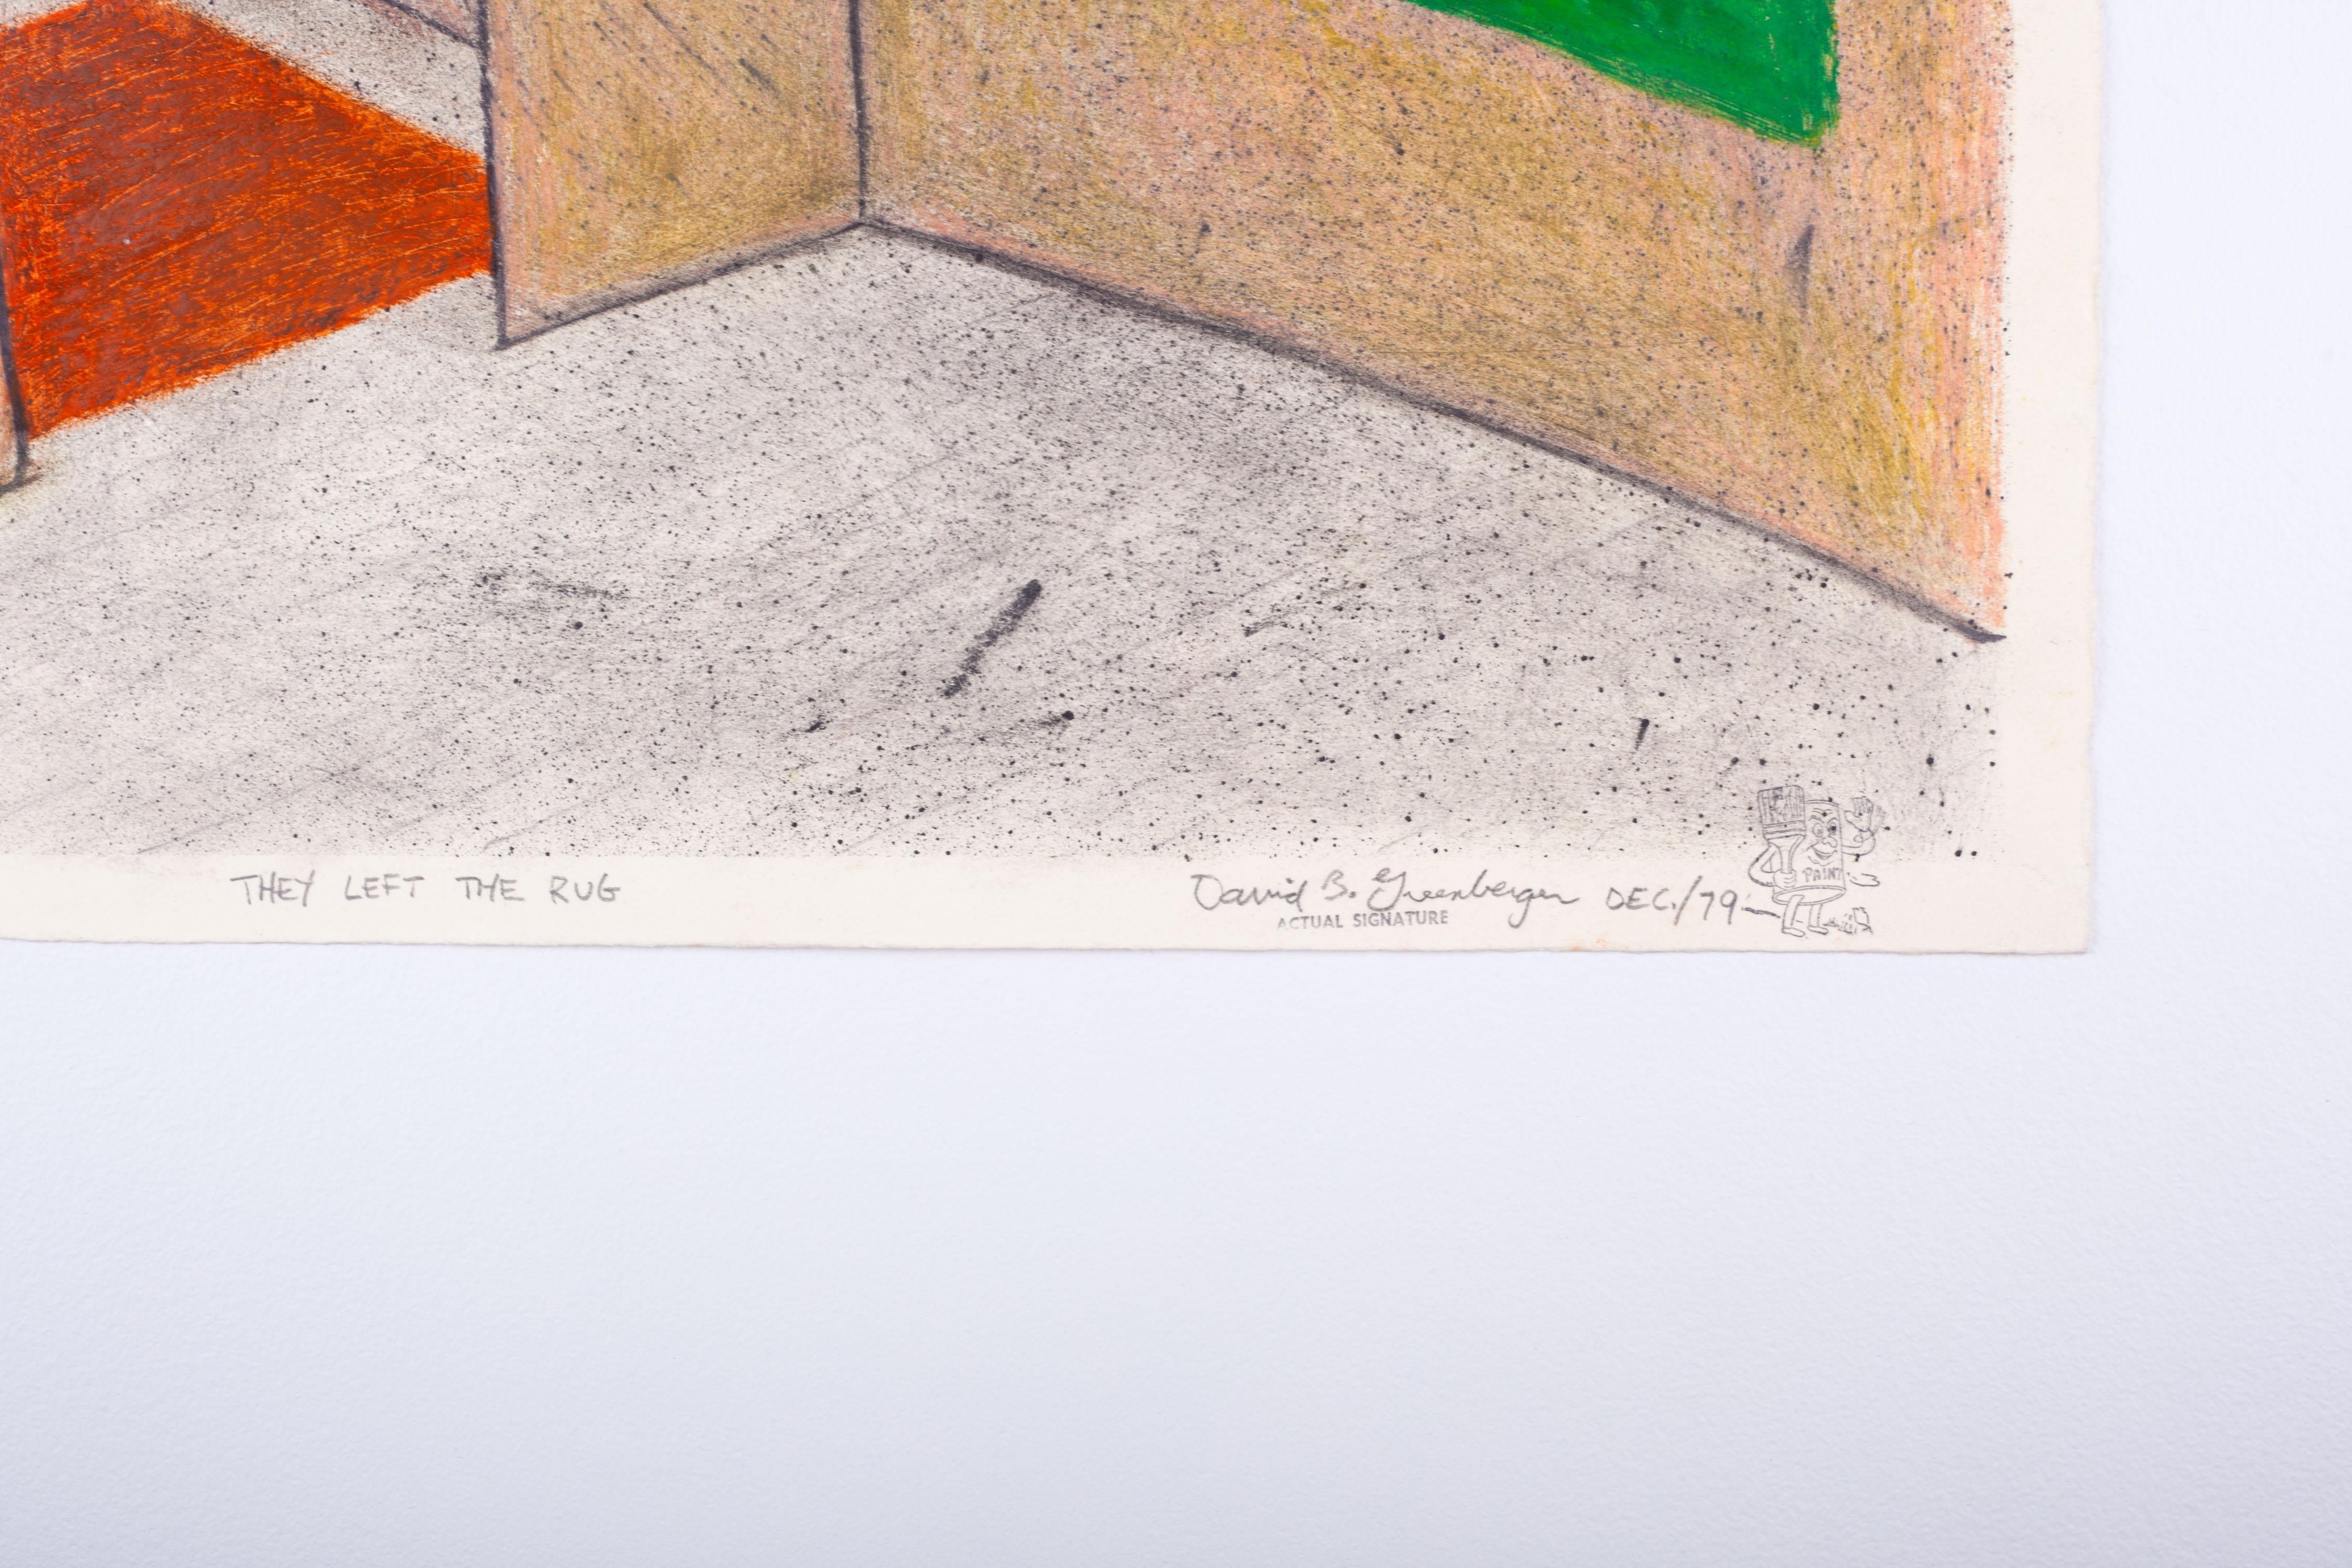 They Left The Rug by David Greenberger, signed dated 1979. Pastel and colored pencil on paper.
Original pastel drawing of an empty interior: minimal composition made of simple geometric shapes richly textured in oil pastels. Will do a great combo